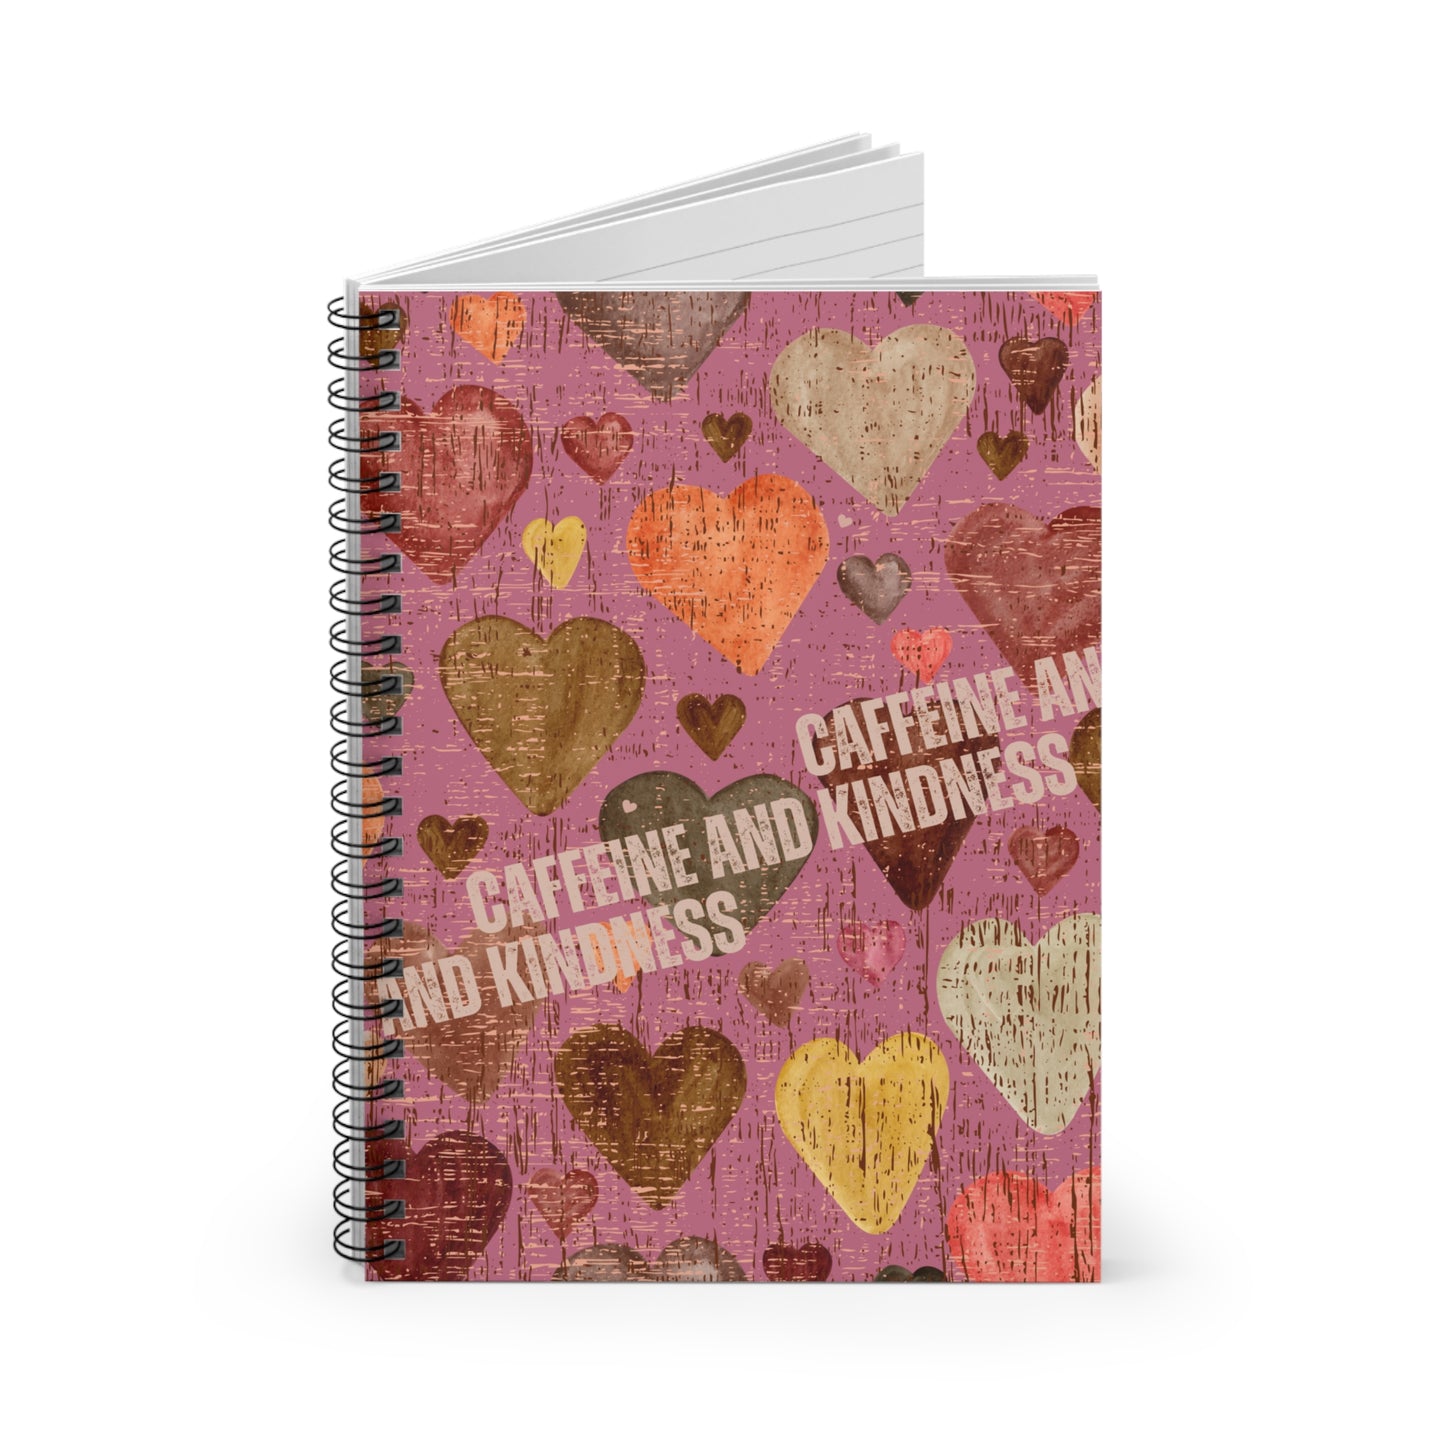 Caffeine & Kindness Harmony: Heartfelt Spiral Notebook for Uplifting Thoughts and Java-Inspired Reflections - Eddy and Rita